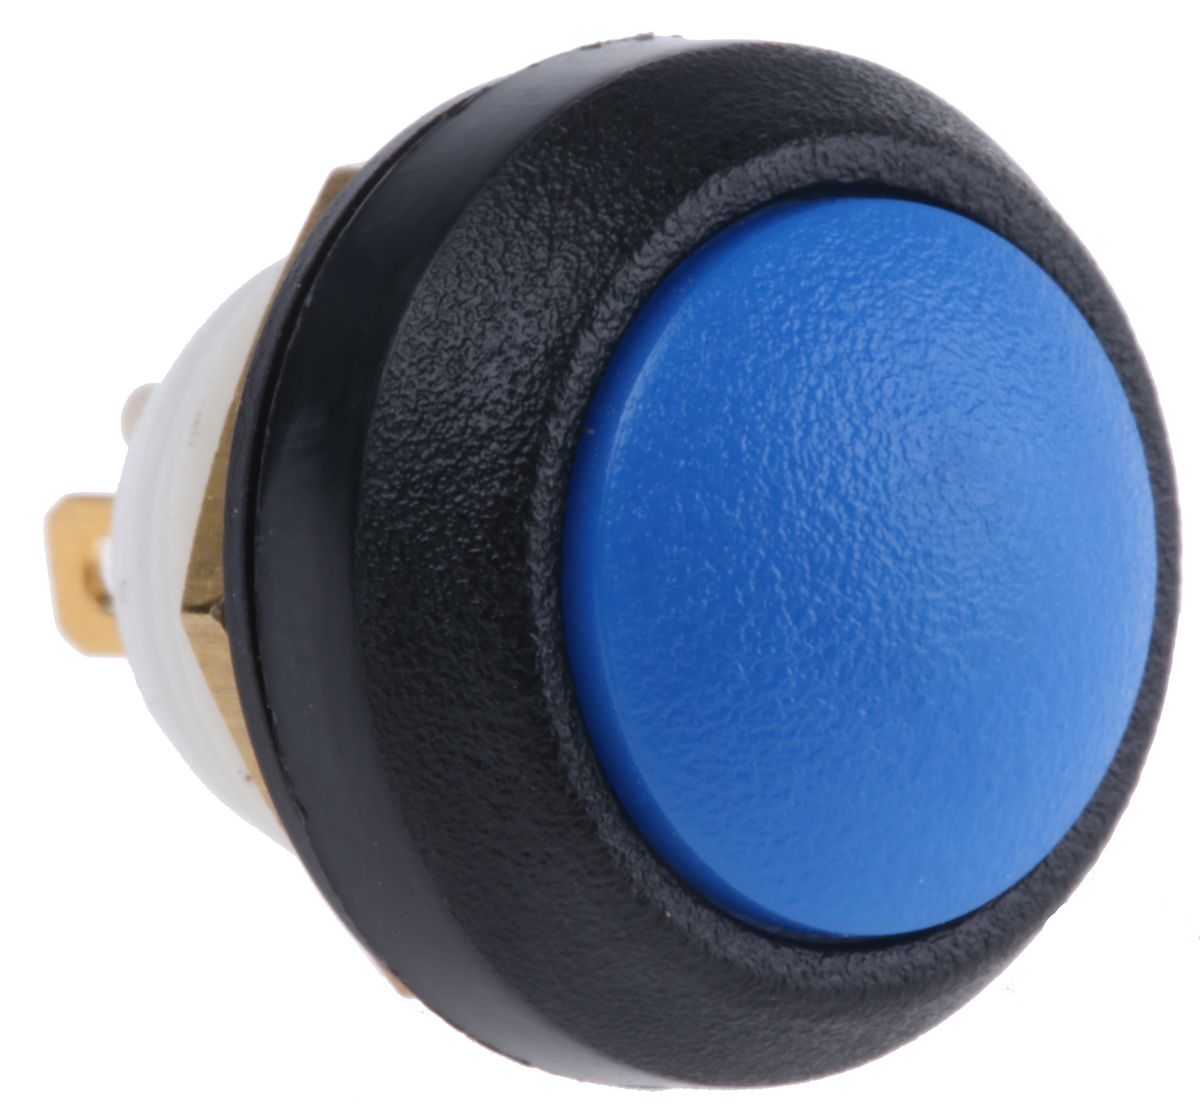 ITW Switches 48 Series Latching Miniature Push Button Switch, Panel Mount, SPST, 13.6mm Cutout, Clear LED, 48V dc, IP67